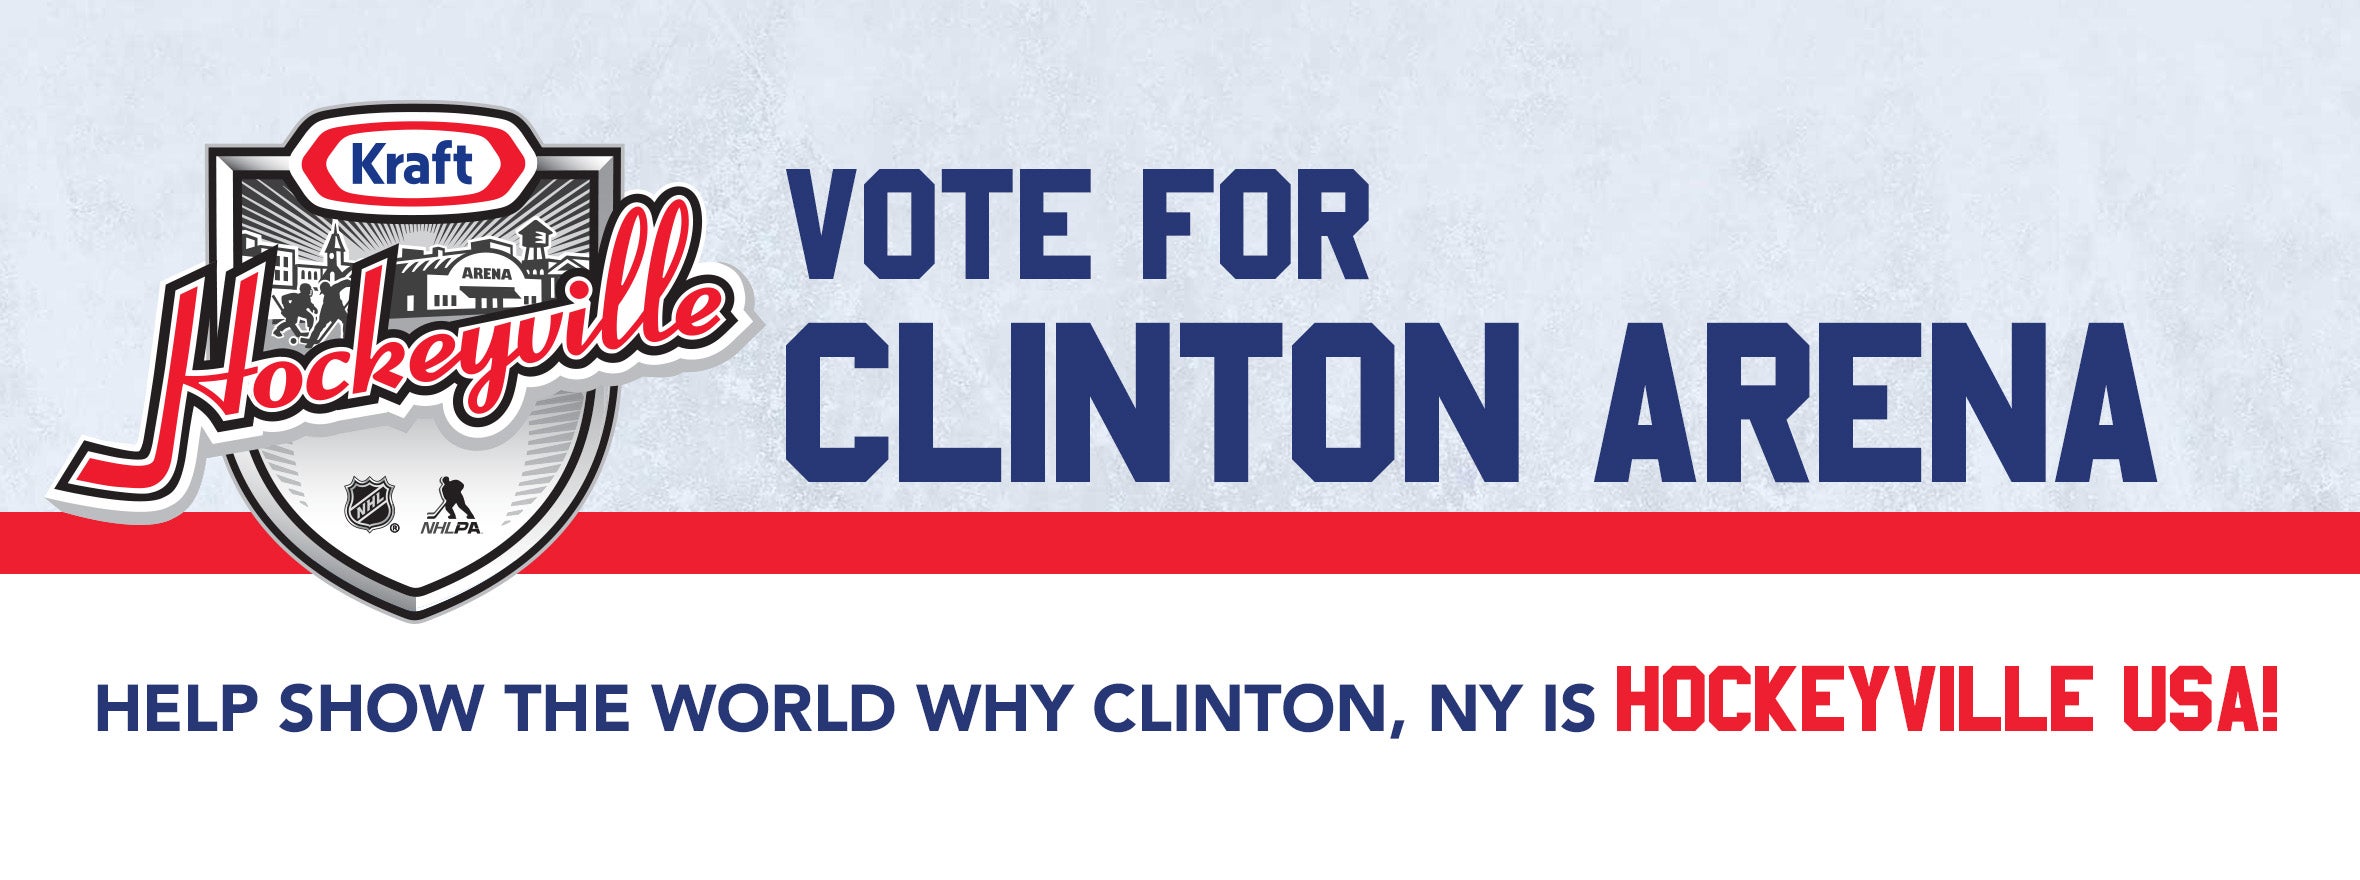 VOTE FOR CLINTON ARENA AT MIDNIGHT